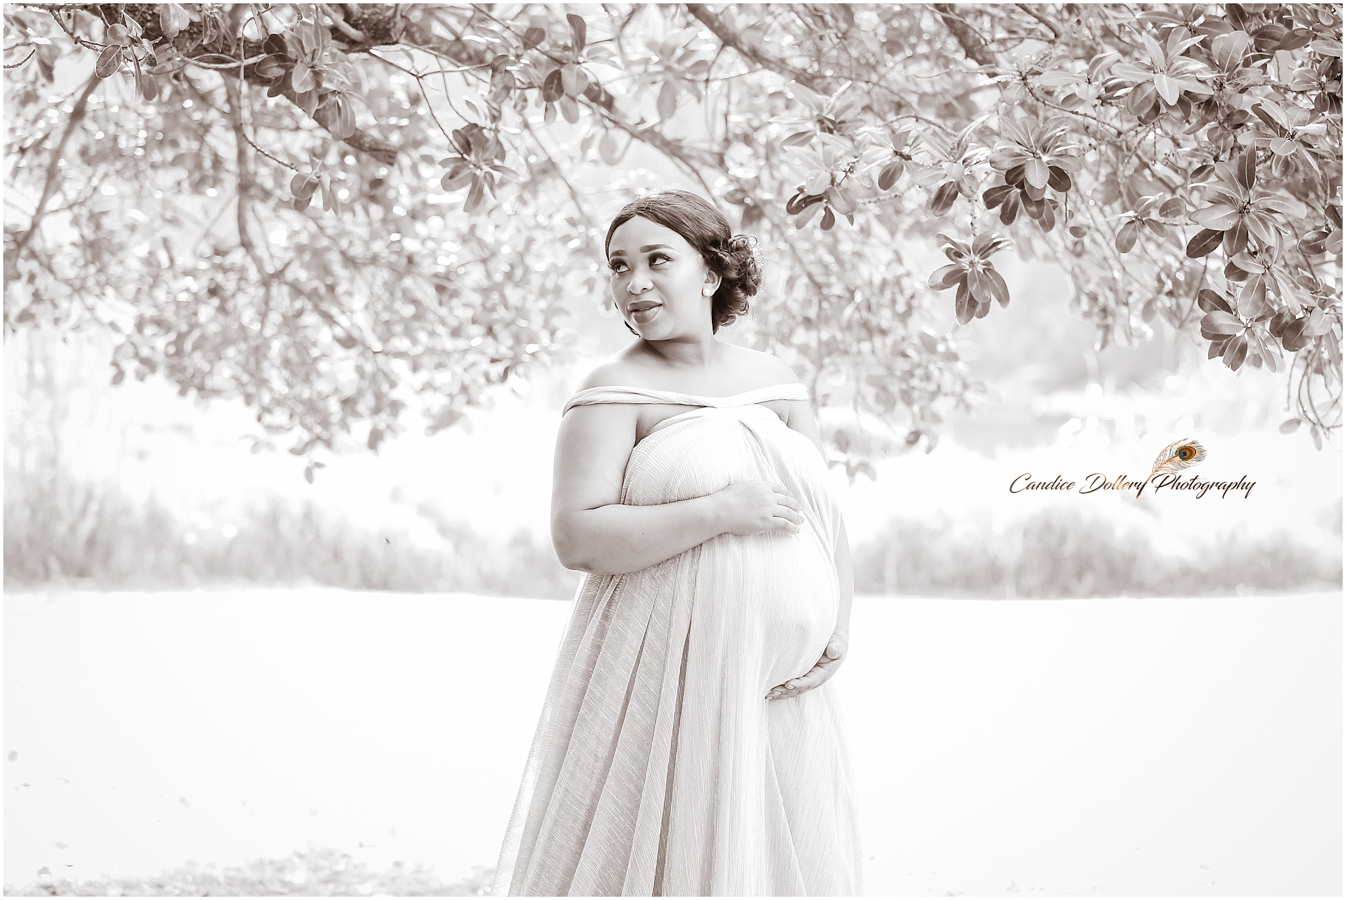 Candice Dollery Photography -baby bump_4901